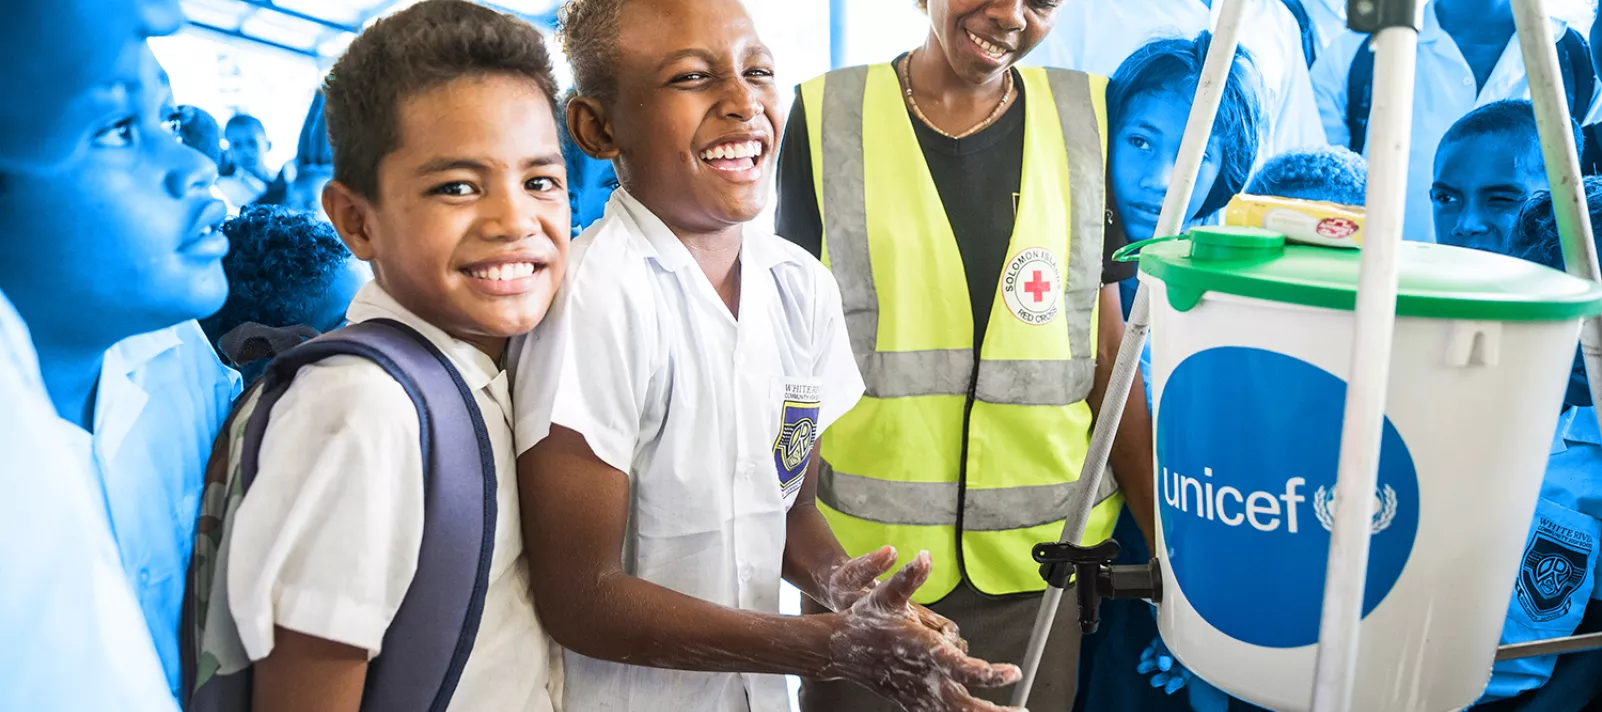 Grade 3 student of White River School in Honiara, Patty Patrick, 10, washing his hands next to a Red Cross staff member during a workshop organised by UNICEF with their partners from the Red Cross. During the workshop Red Cross workers showed children how to properly use hygiene items